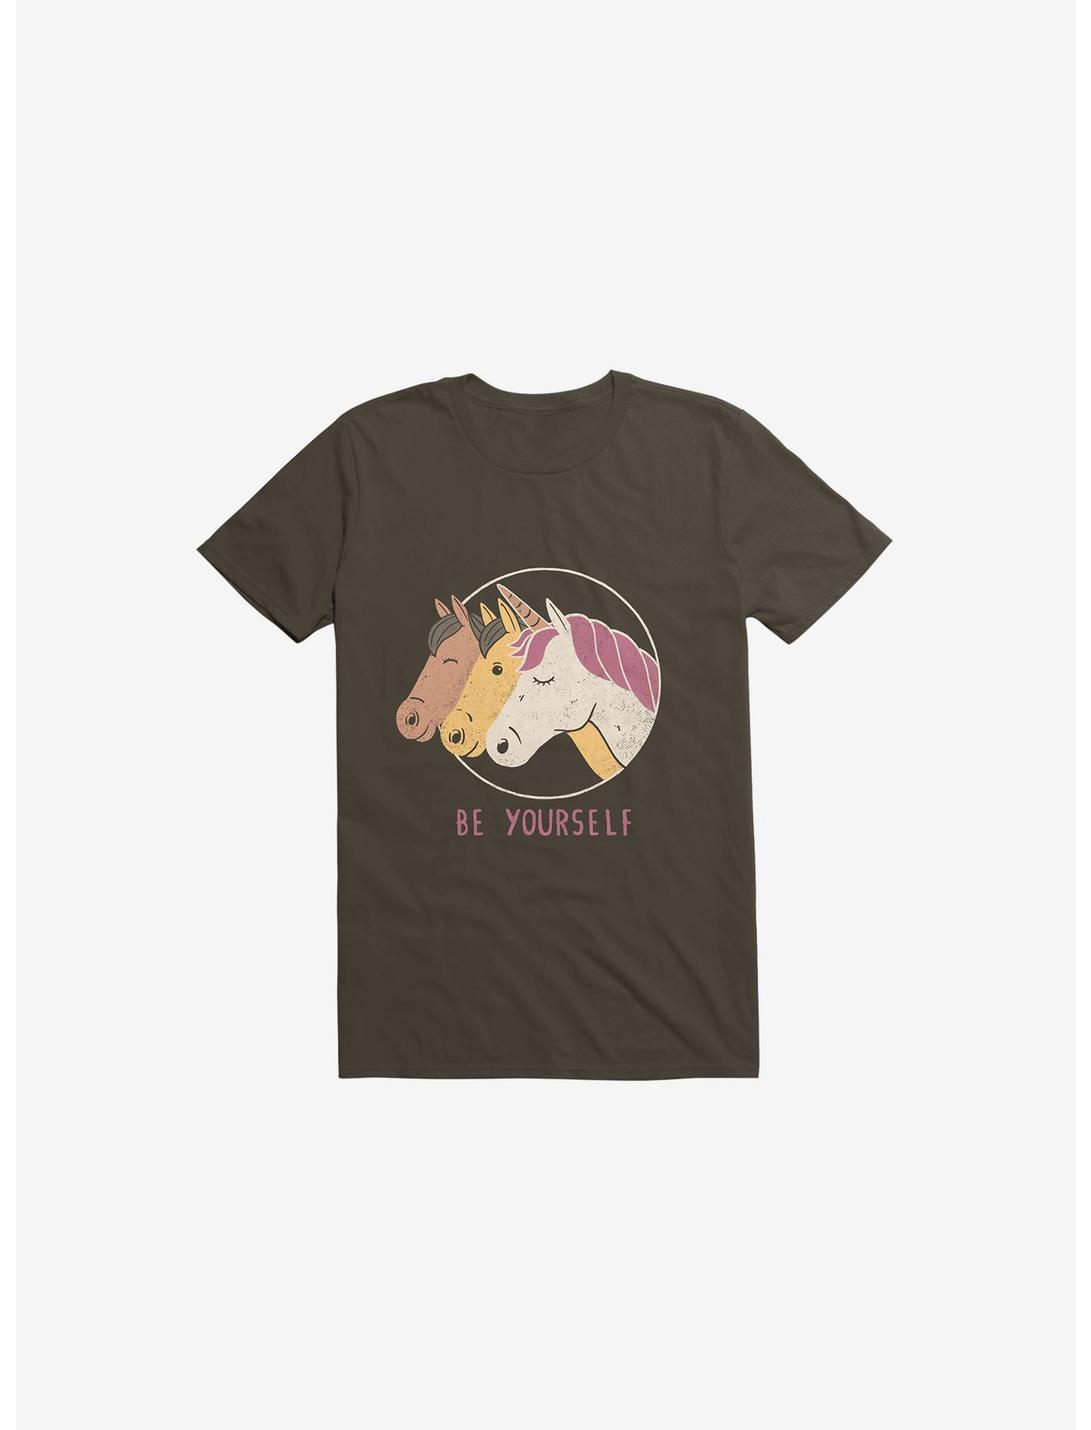 Be Yourself Unicorn Brown T-Shirt, BROWN, hi-res